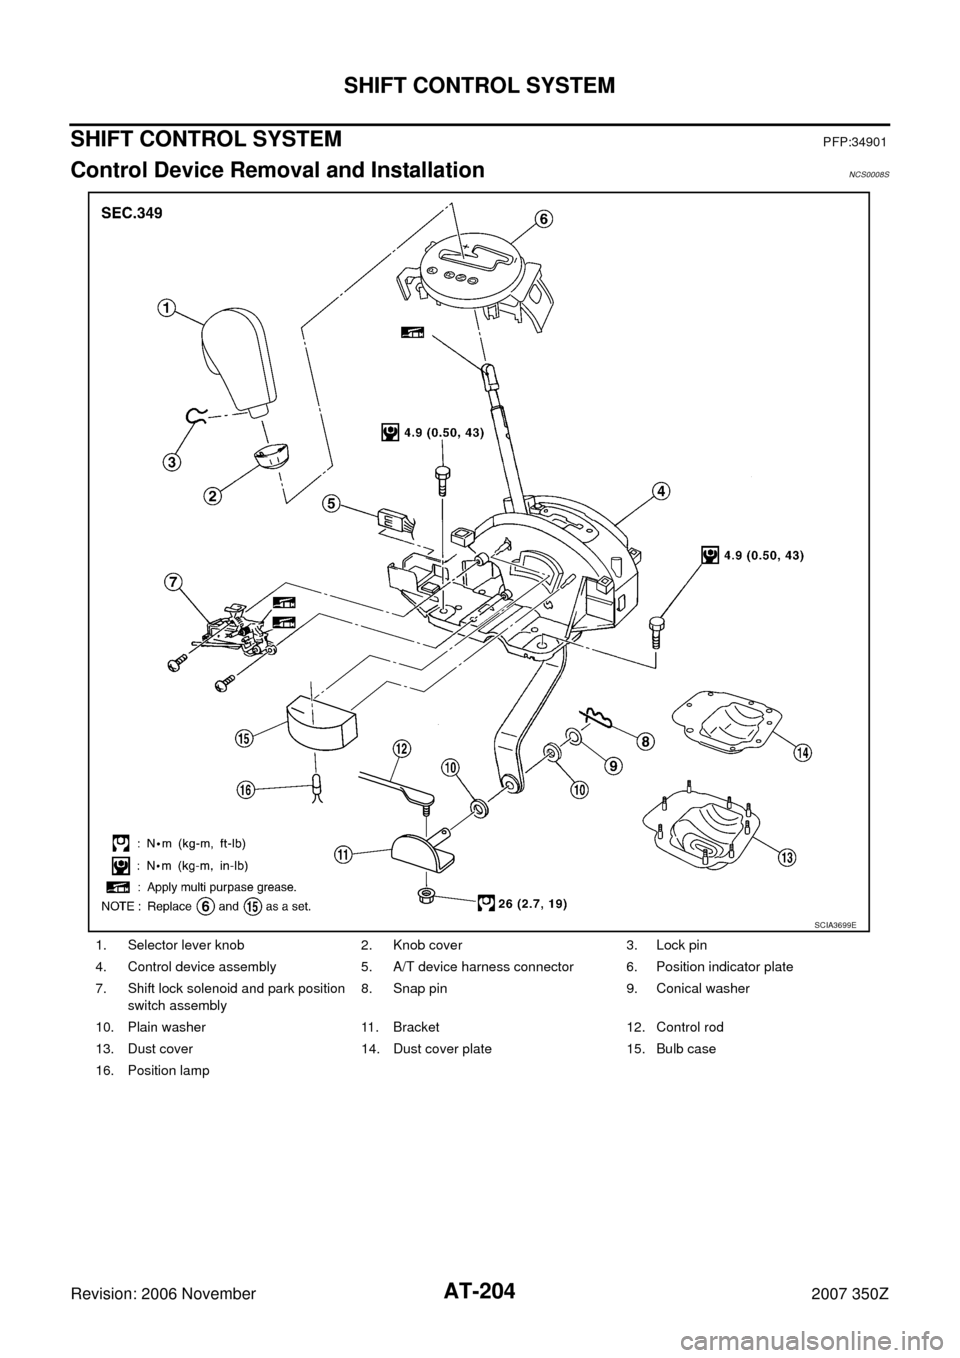 NISSAN 350Z 2007 Z33 Automatic Transmission Workshop Manual AT-204
SHIFT CONTROL SYSTEM
Revision: 2006 November2007 350Z
SHIFT CONTROL SYSTEMPFP:34901
Control Device Removal and InstallationNCS0008S
1. Selector lever knob 2. Knob cover 3. Lock pin
4. Control d